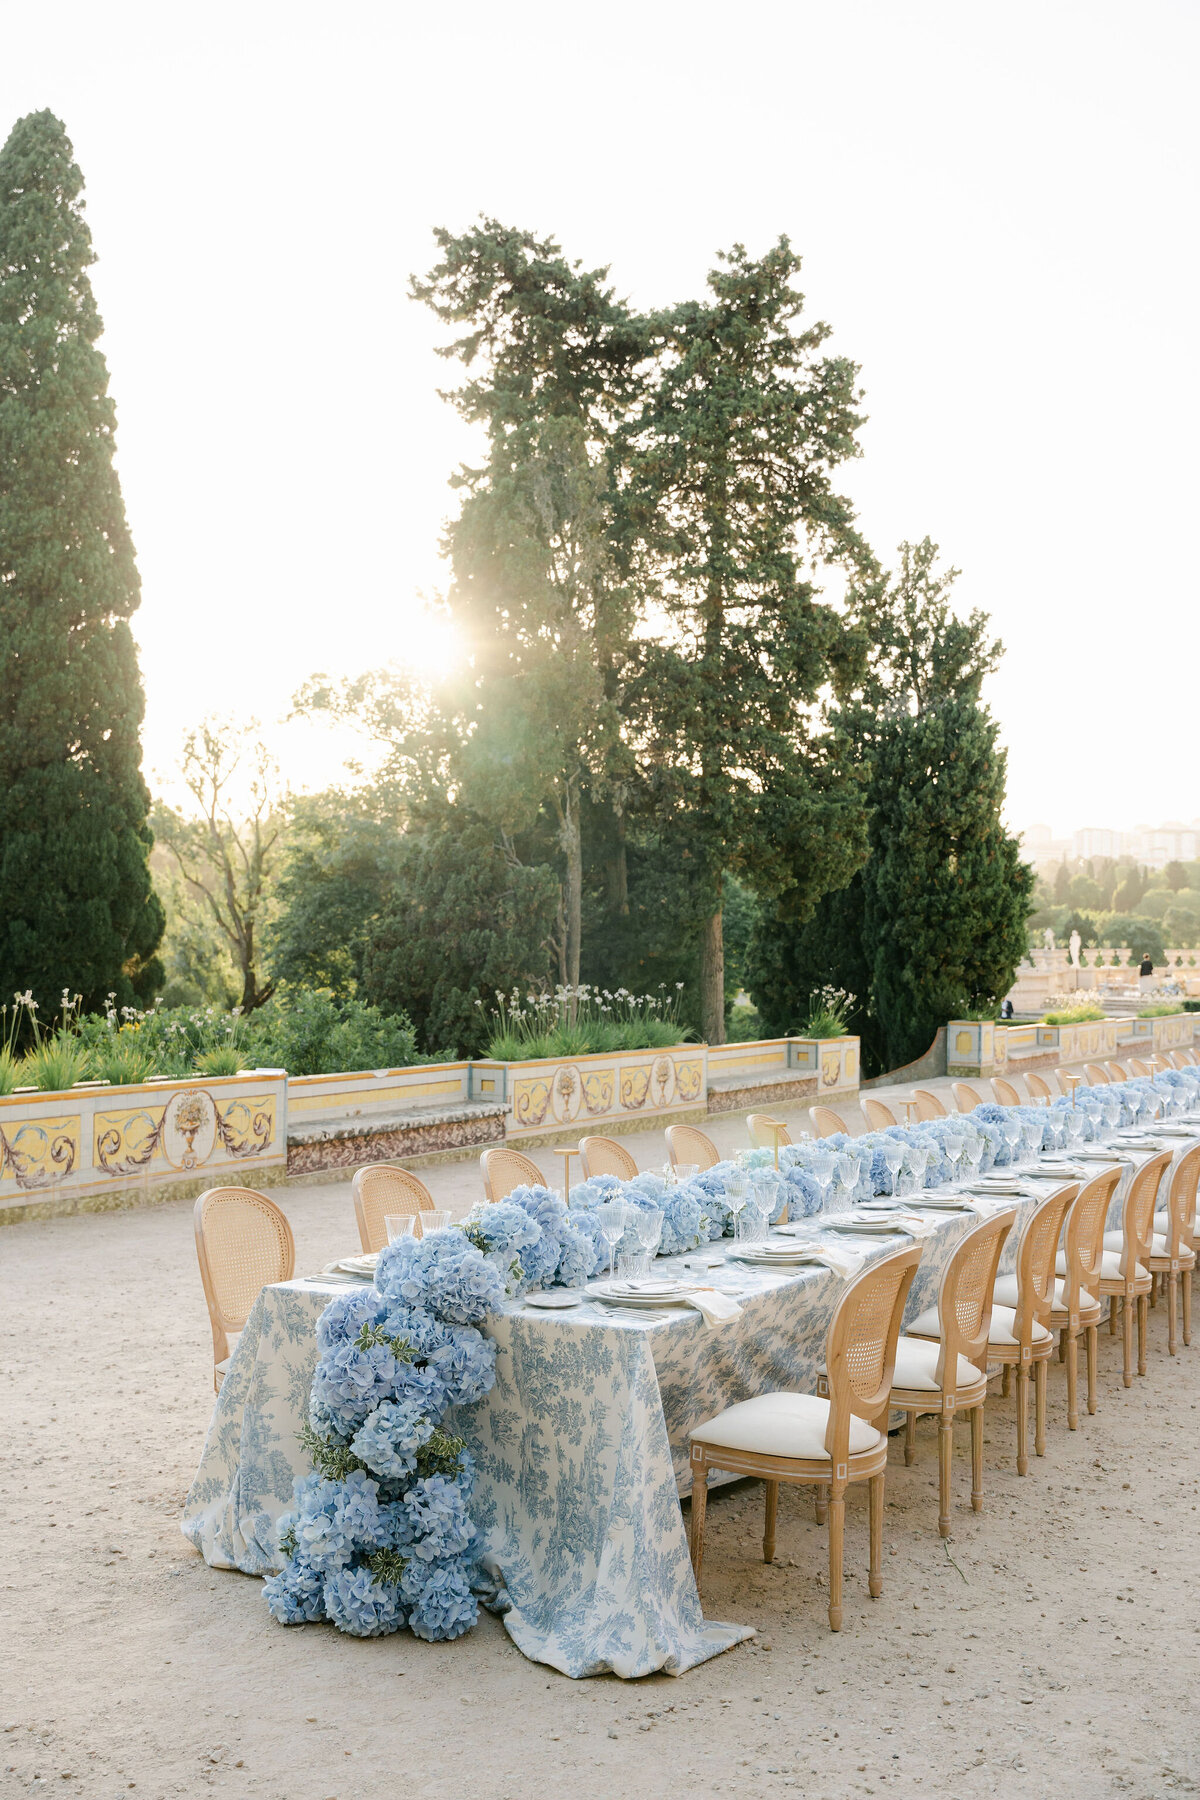 Toile de jouy wedding reception royal tablescape with a blue hydrangea runner